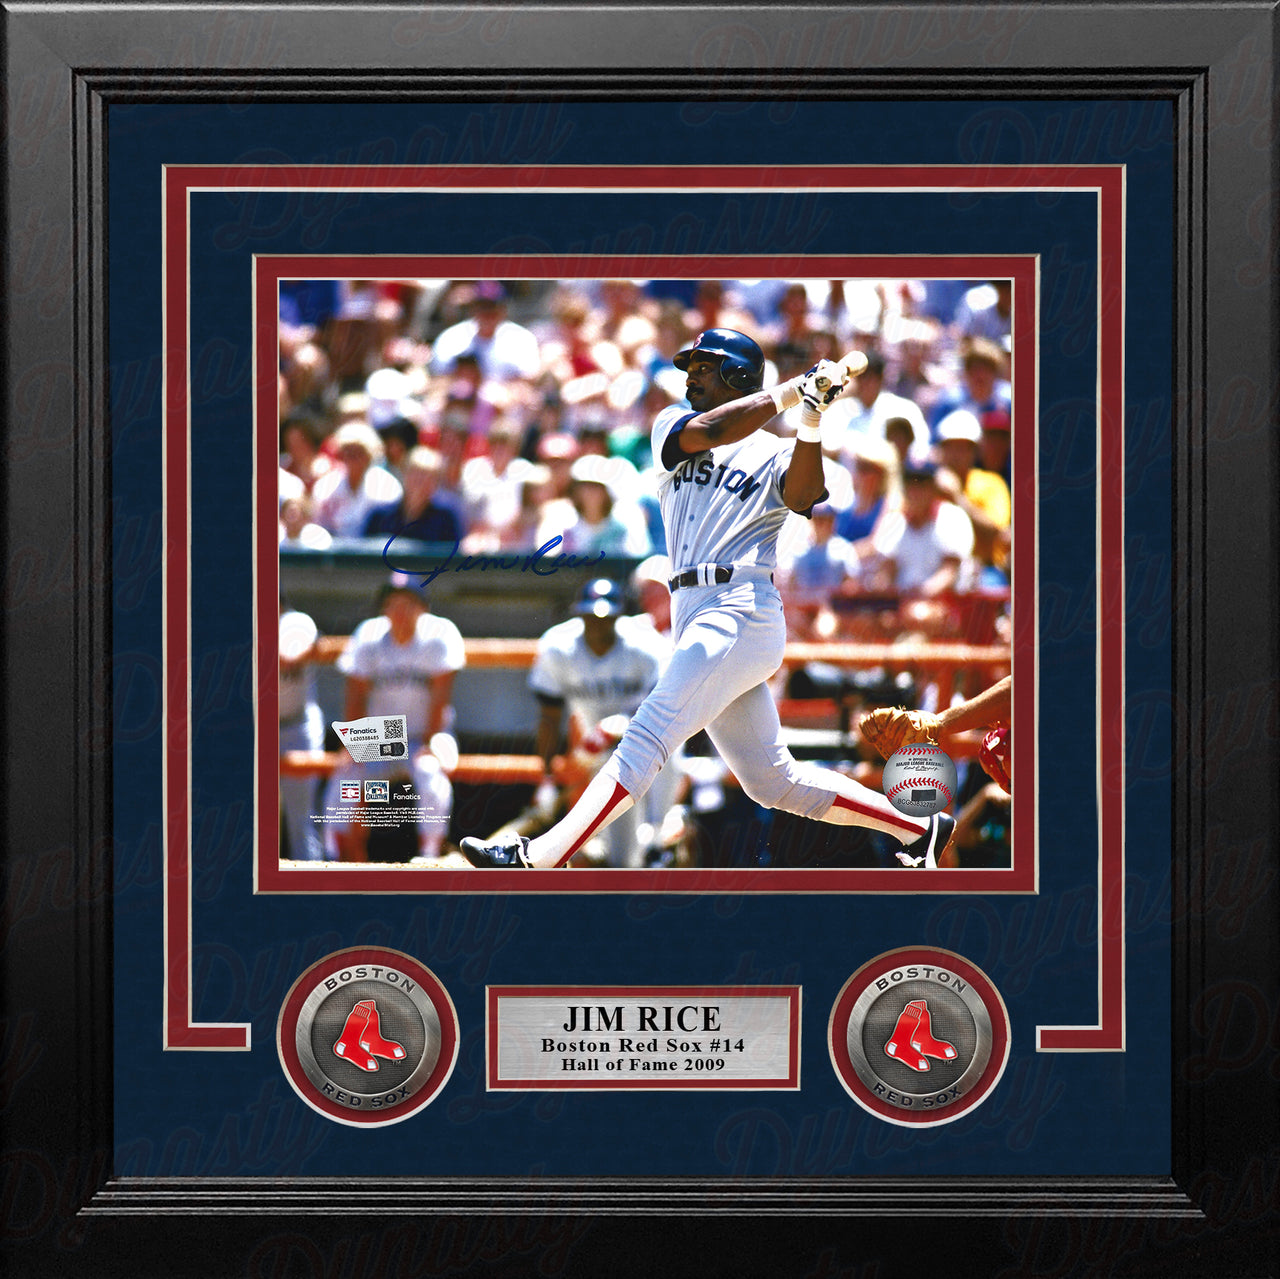 Jim Rice Swinging Action Boston Red Sox Autographed 8" x 10" Framed Baseball Photo - Dynasty Sports & Framing 